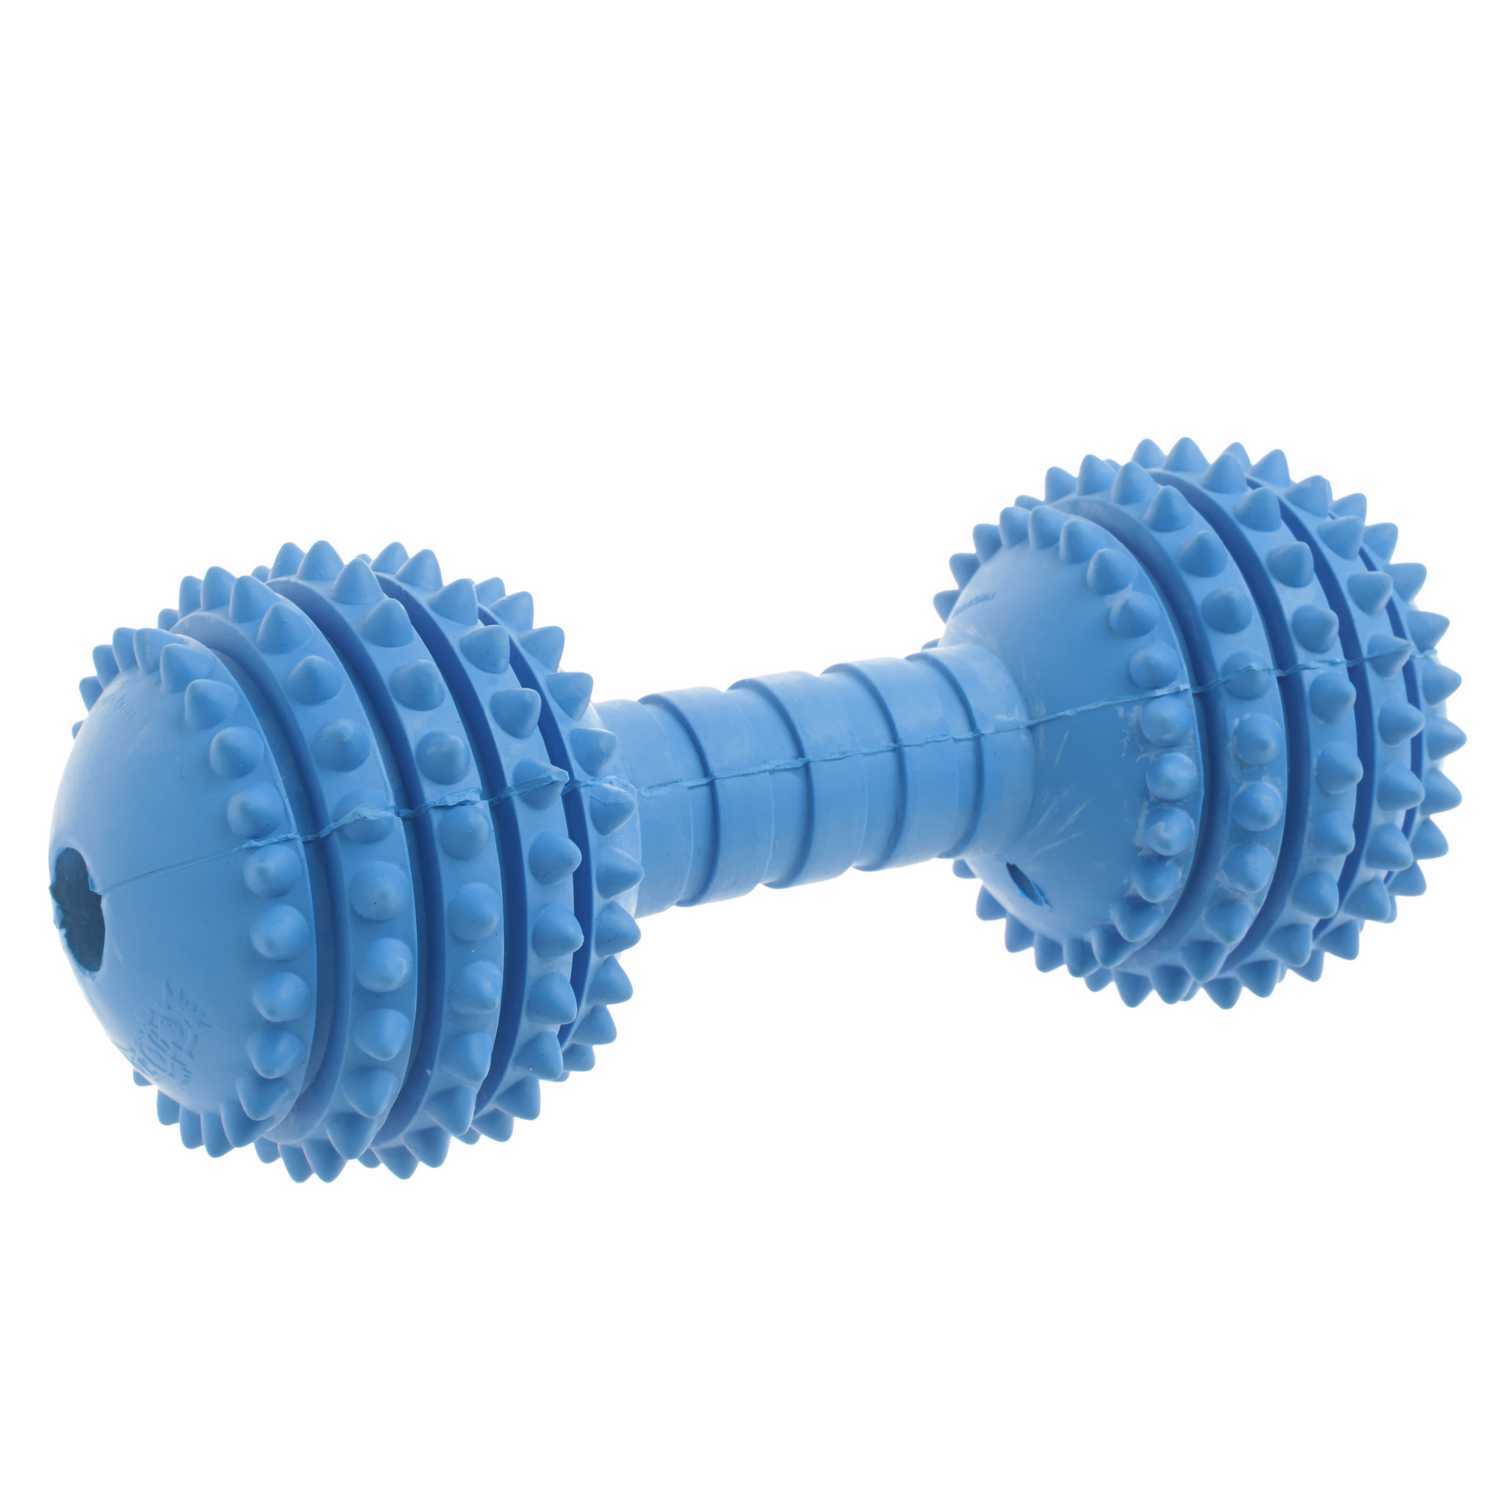 Cyber Dog Asteroid Dumbbell Dog Toy - 20cm Image 3